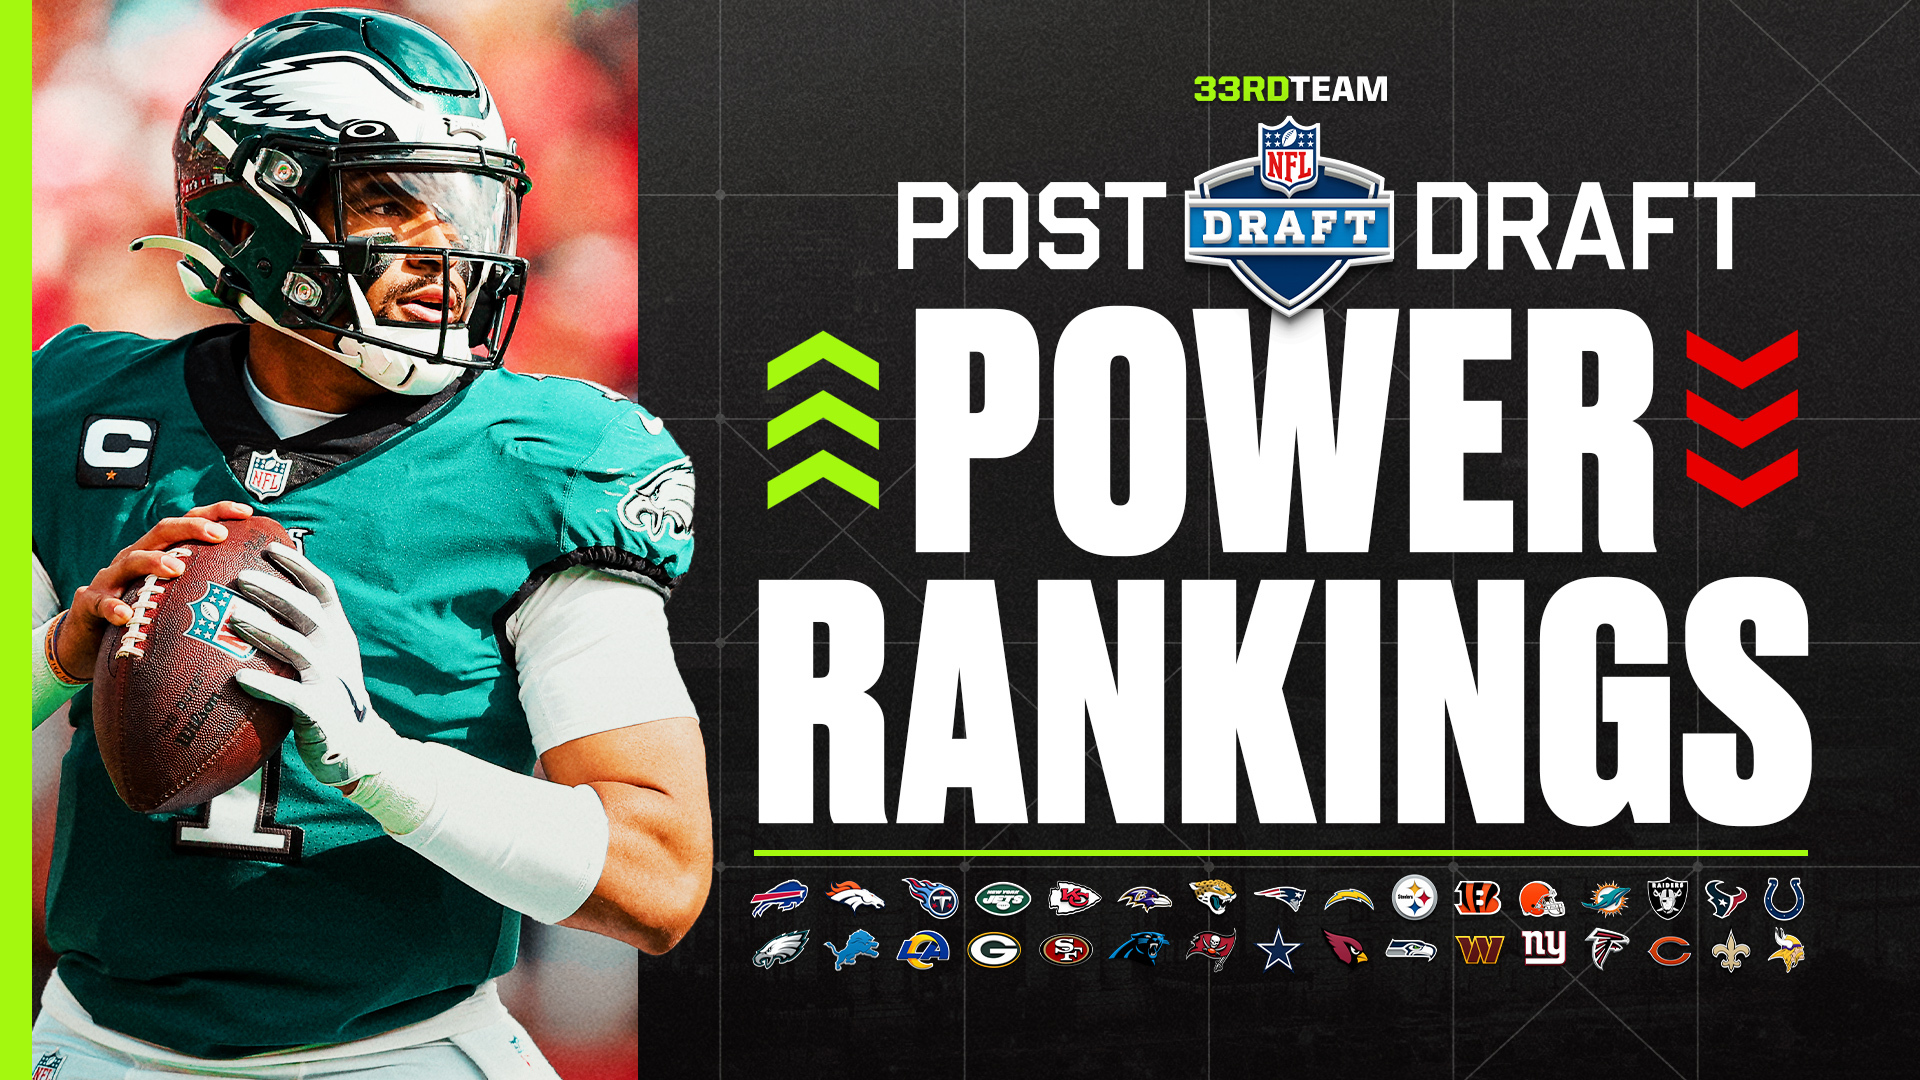 Post-Draft NFL Power Rankings: Eagles Pass Chiefs After Strong Draft